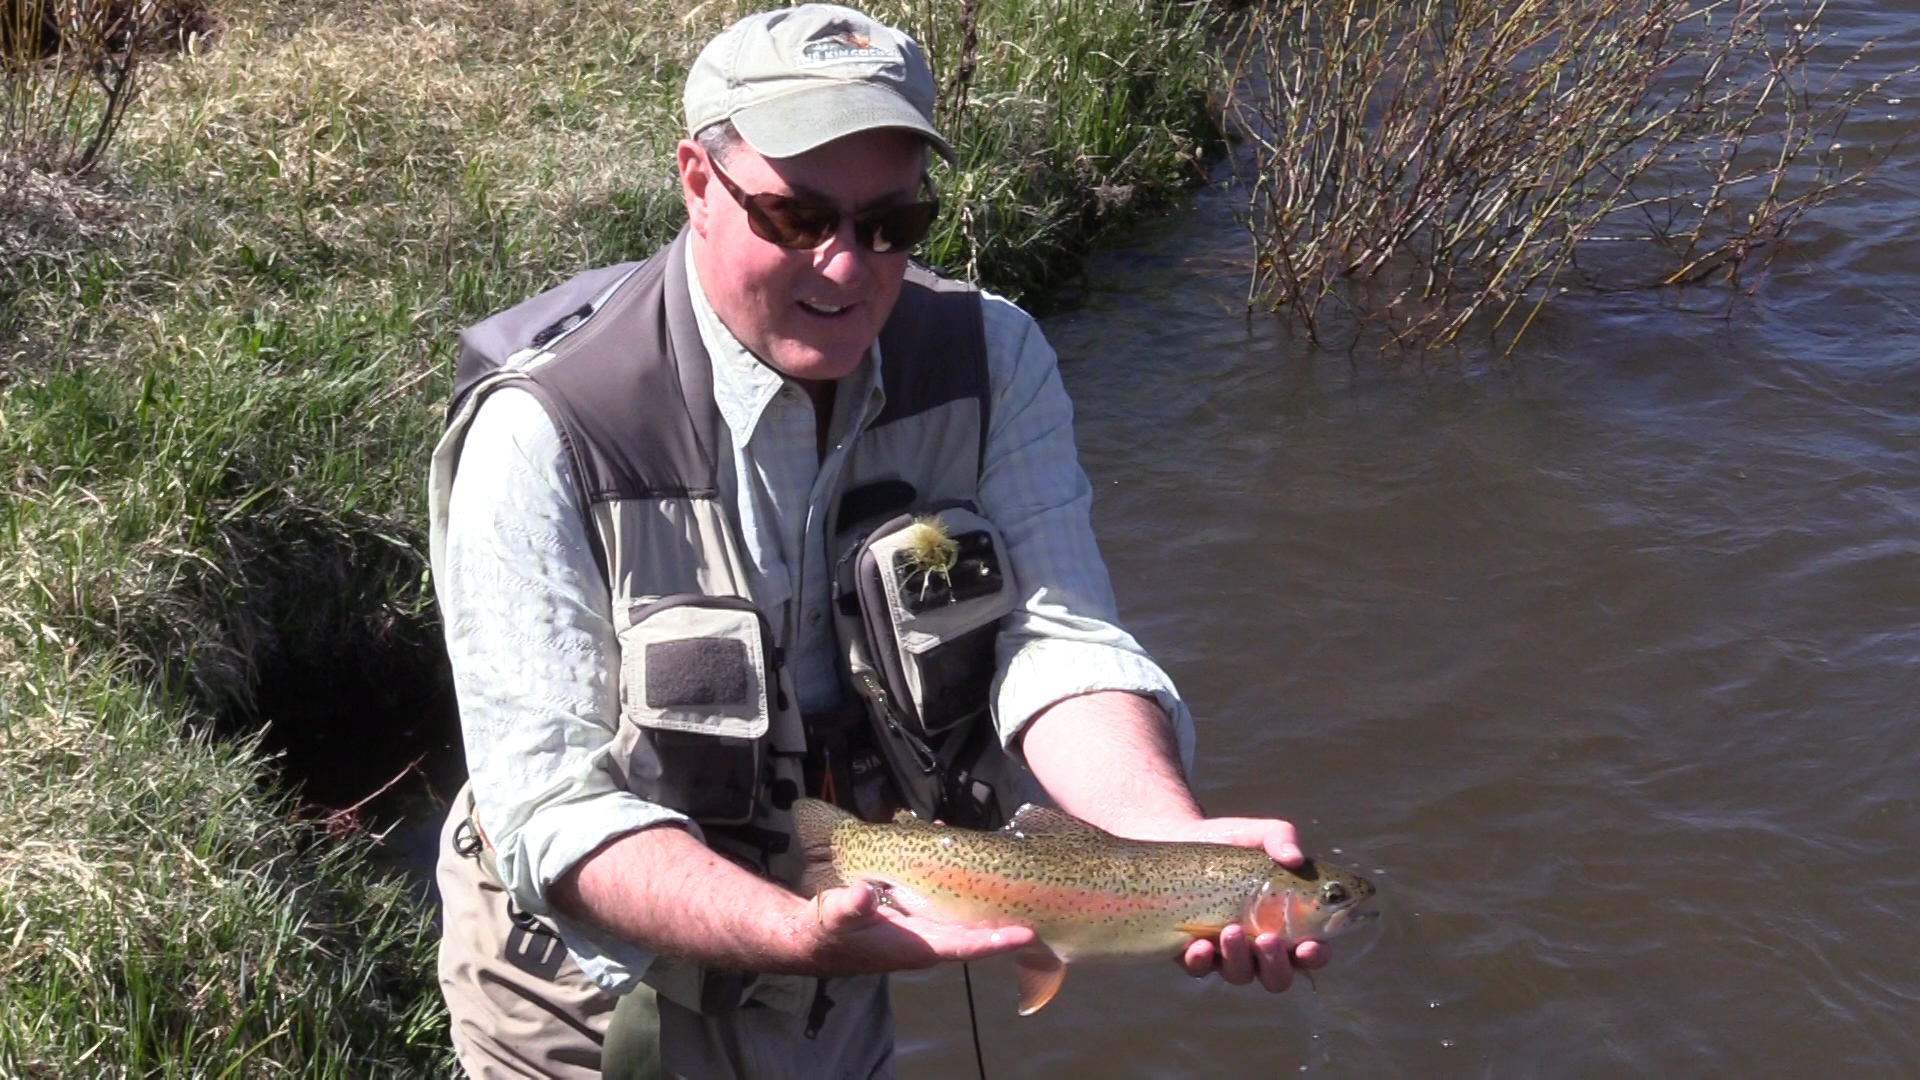 Dave Bennett, water resource strategy director at Denver Water, shows off a rainbow trout caught in the restored section of the Fraser River.